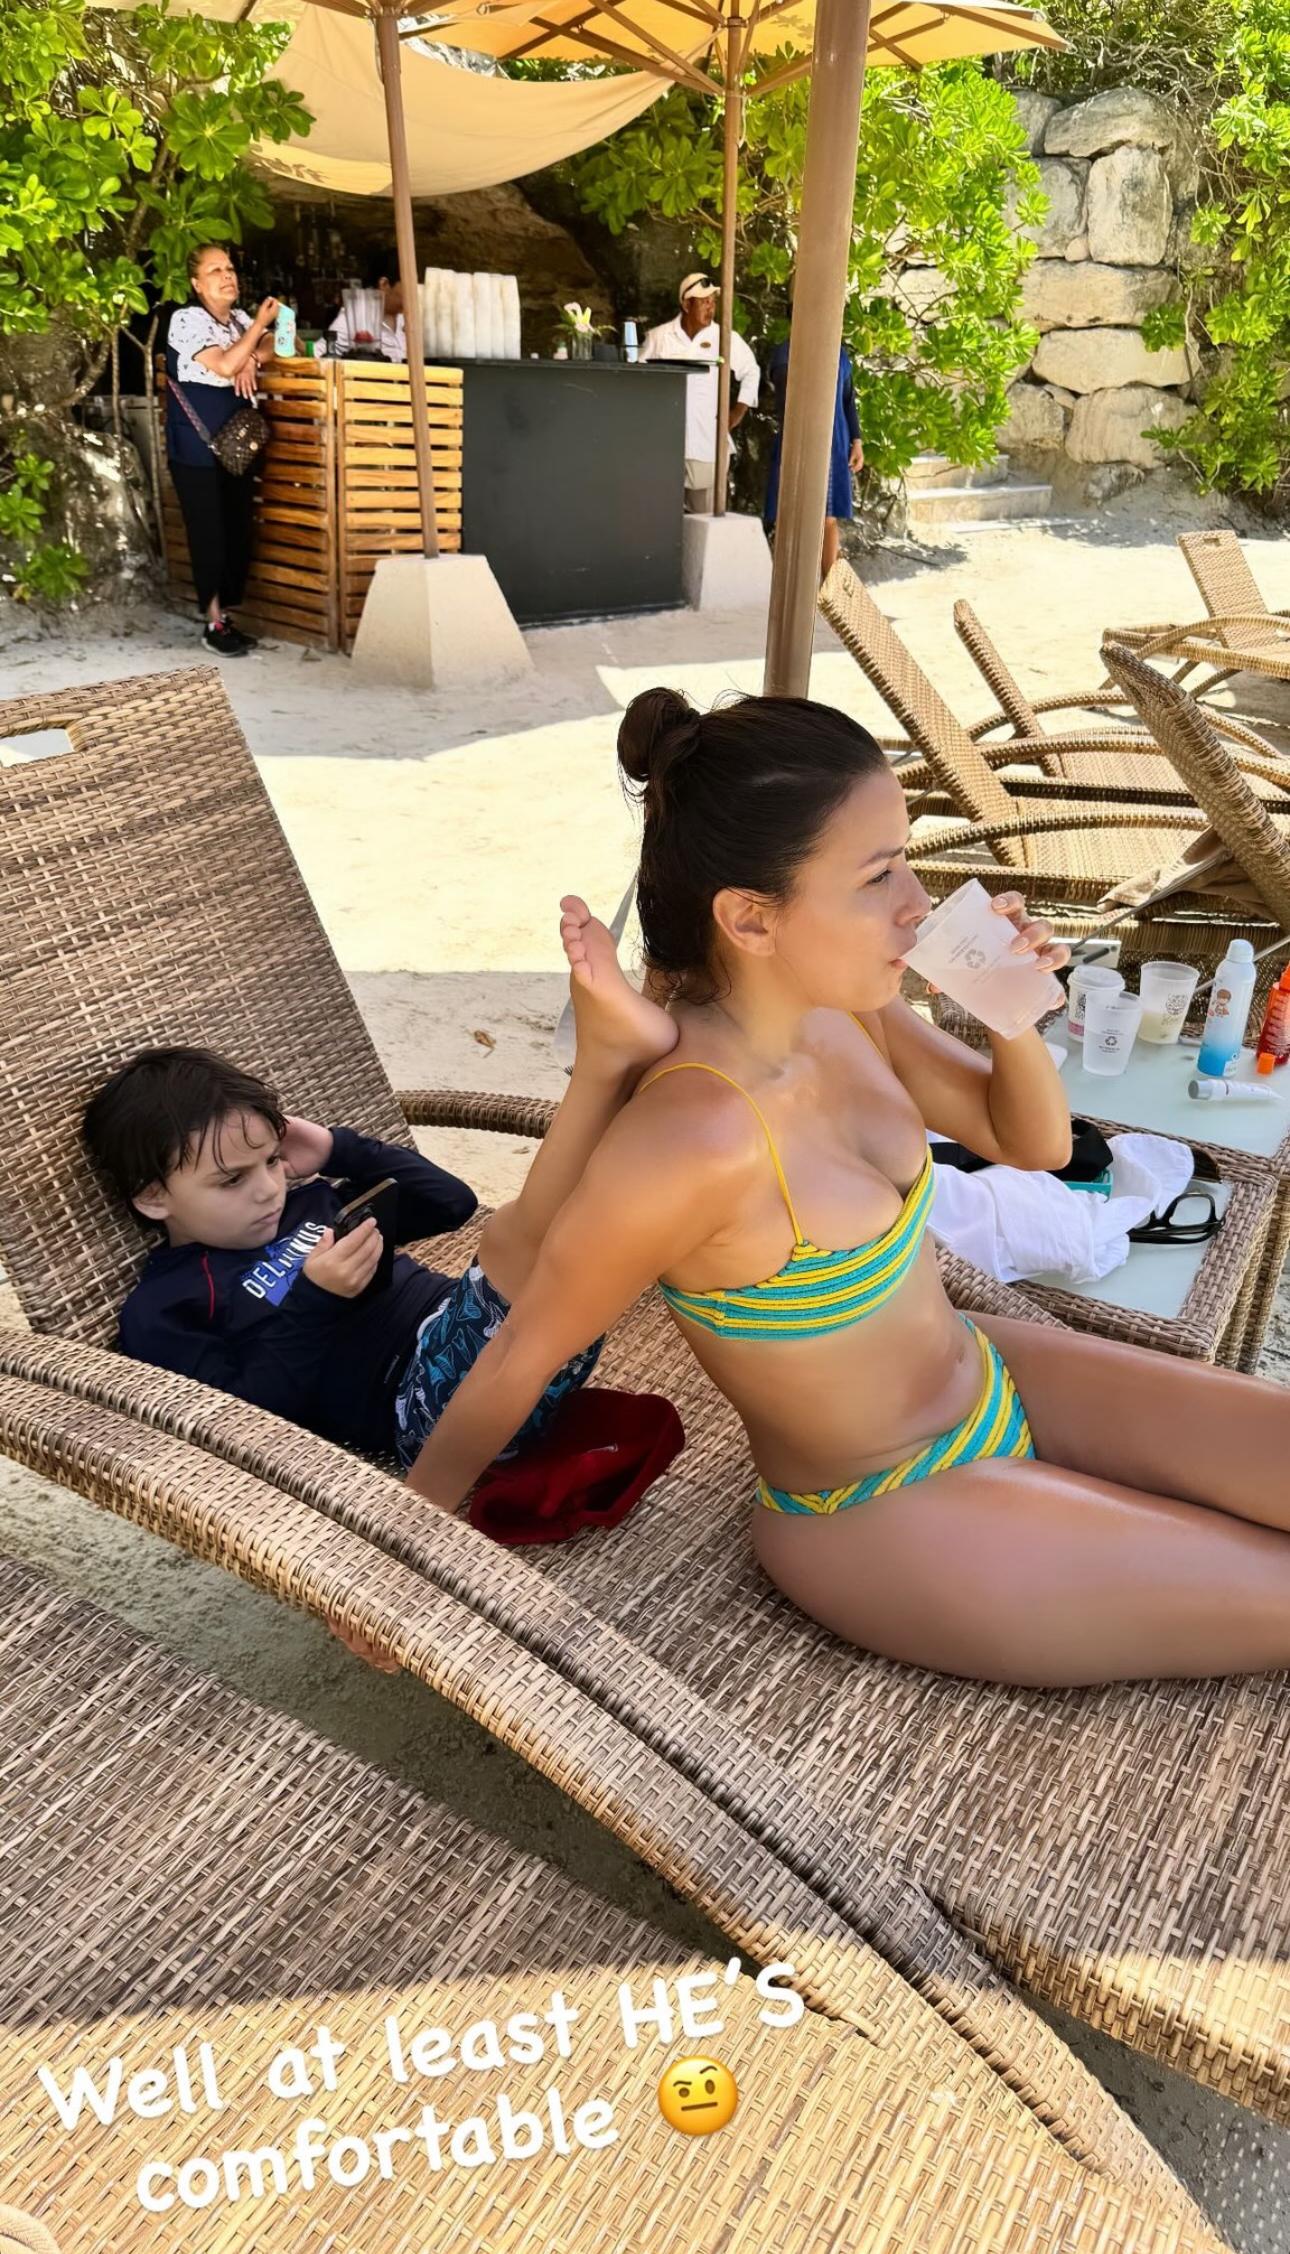 Eva Longoria enjoys a drink while her son hangs his legs on her back.